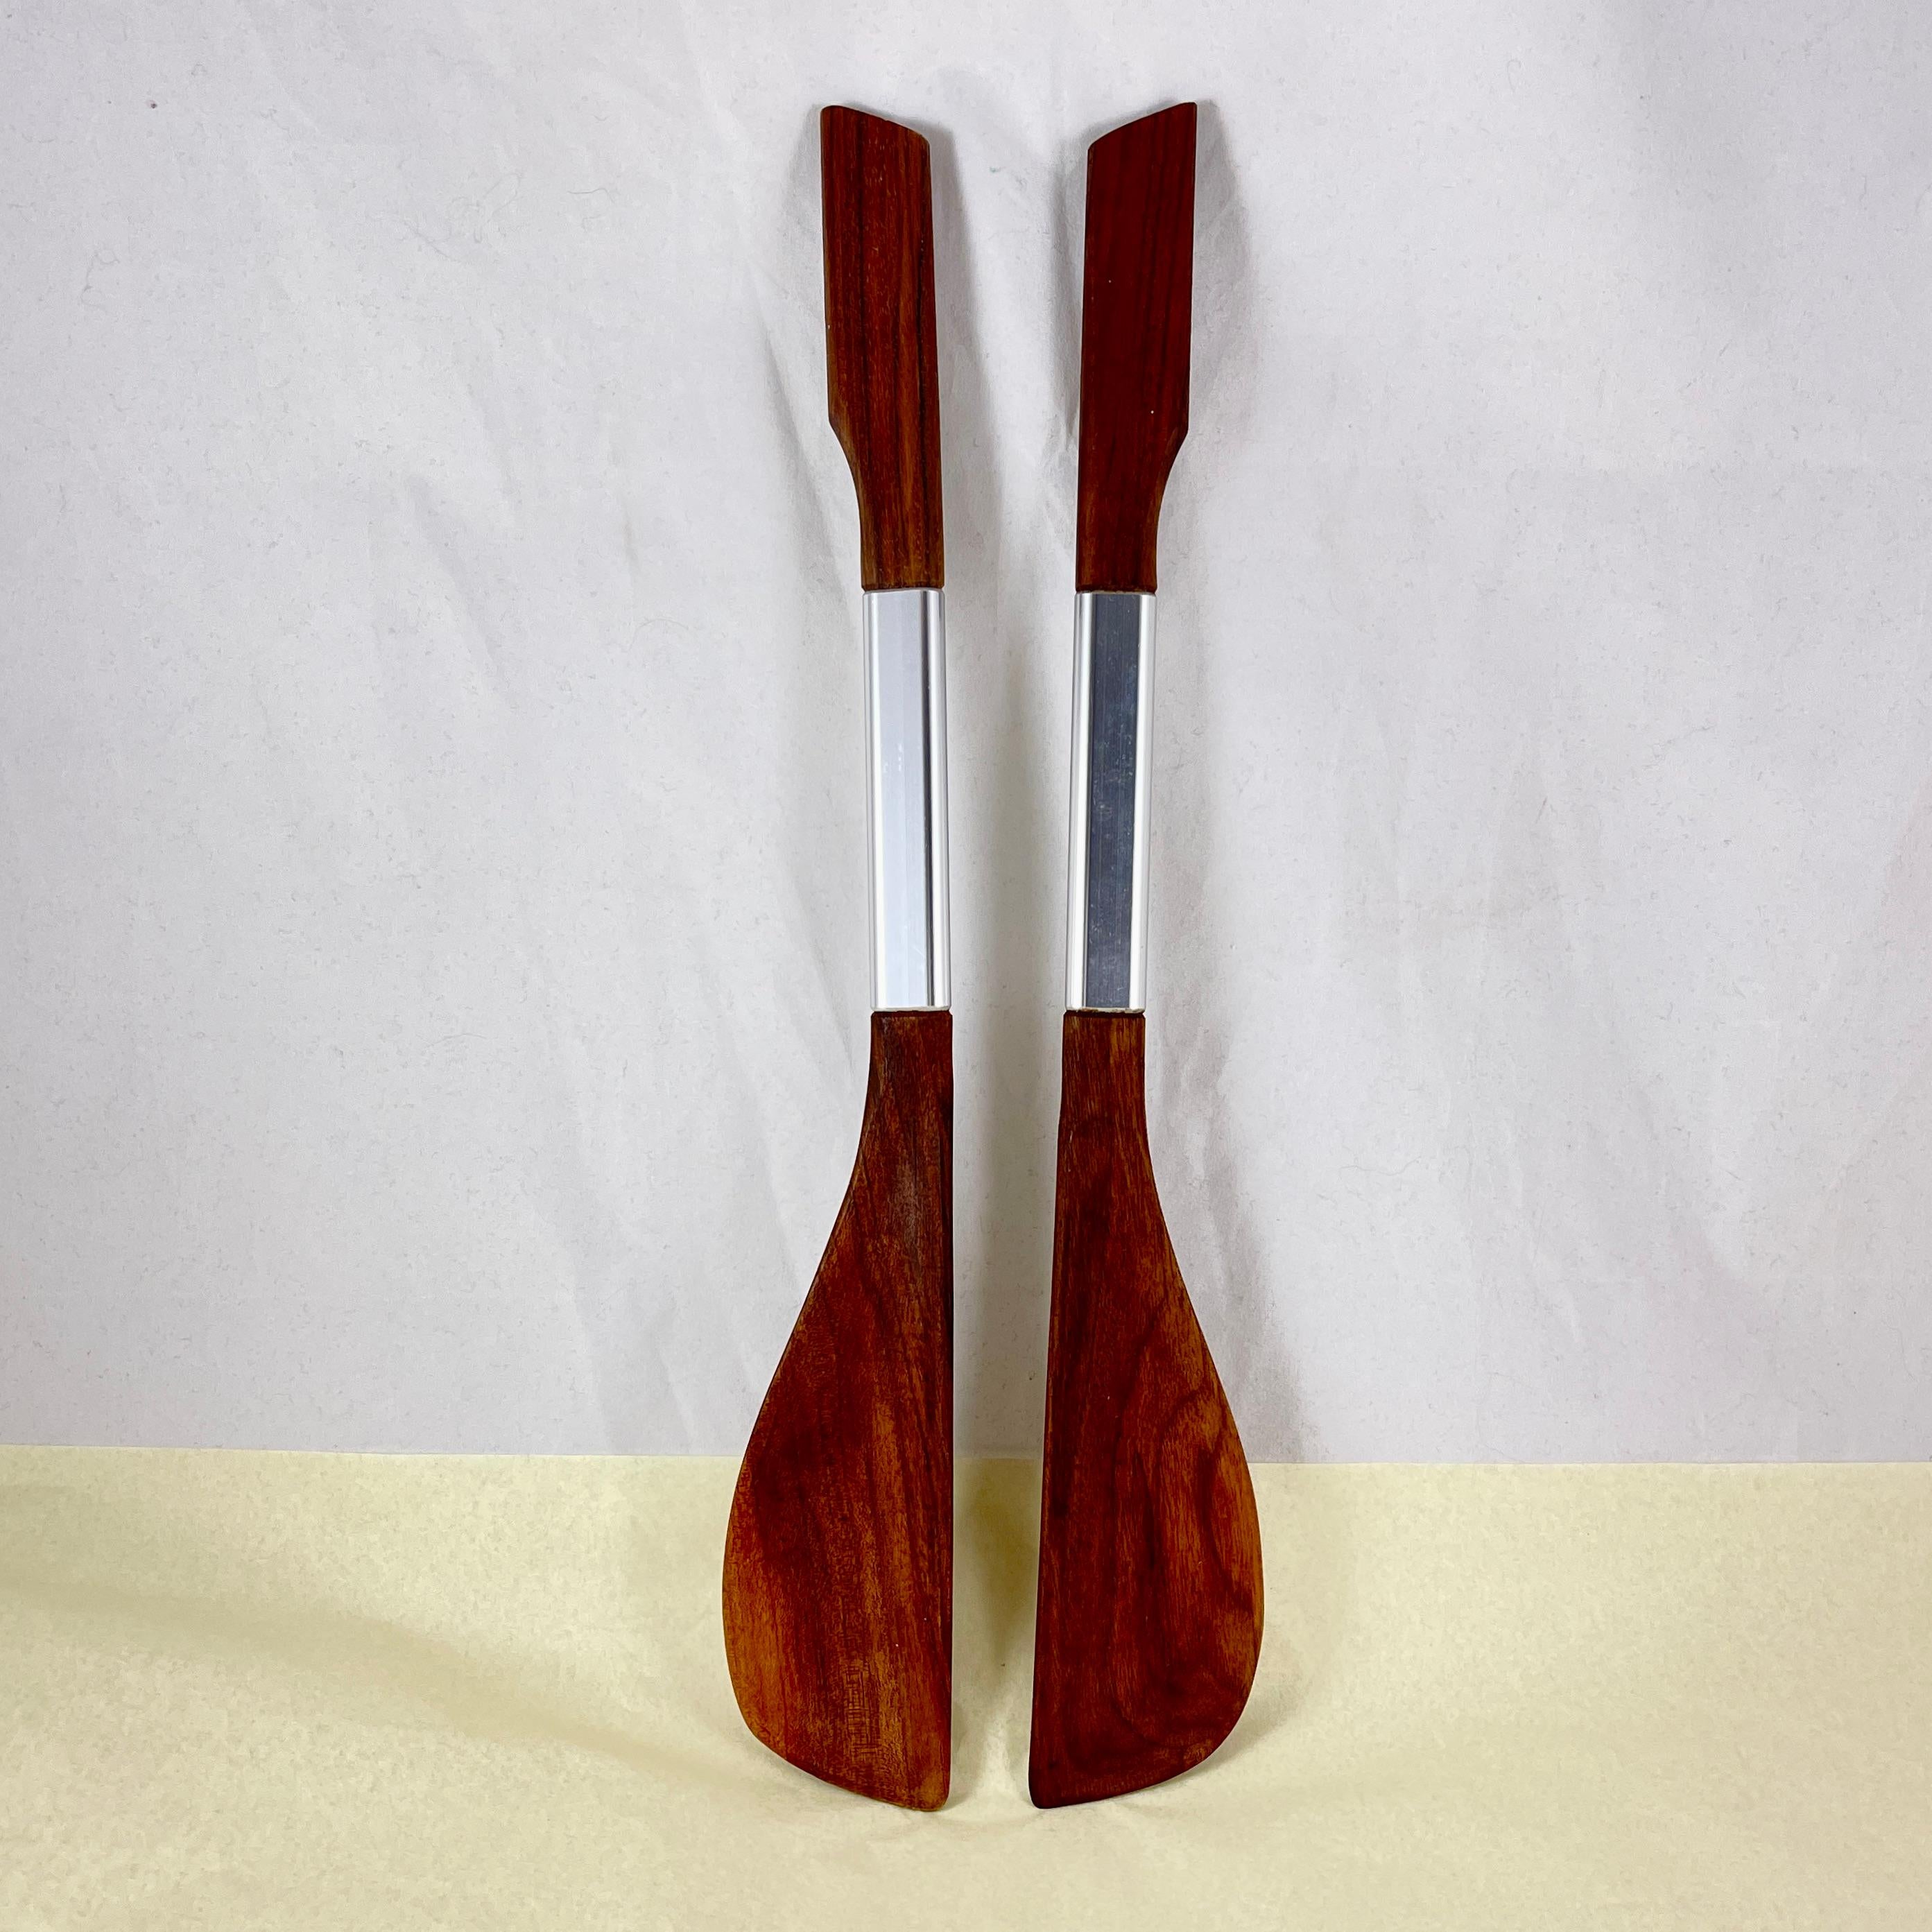 A pair of long handled salad servers of Danish design, from the Scandinavian Modern Mid-Century era, circa 1960-1970.

Carved from teak wood and banded with stainless steel, beautifully balanced.

16 in. L x 2.25 in. W x .50 in. H
Excellent